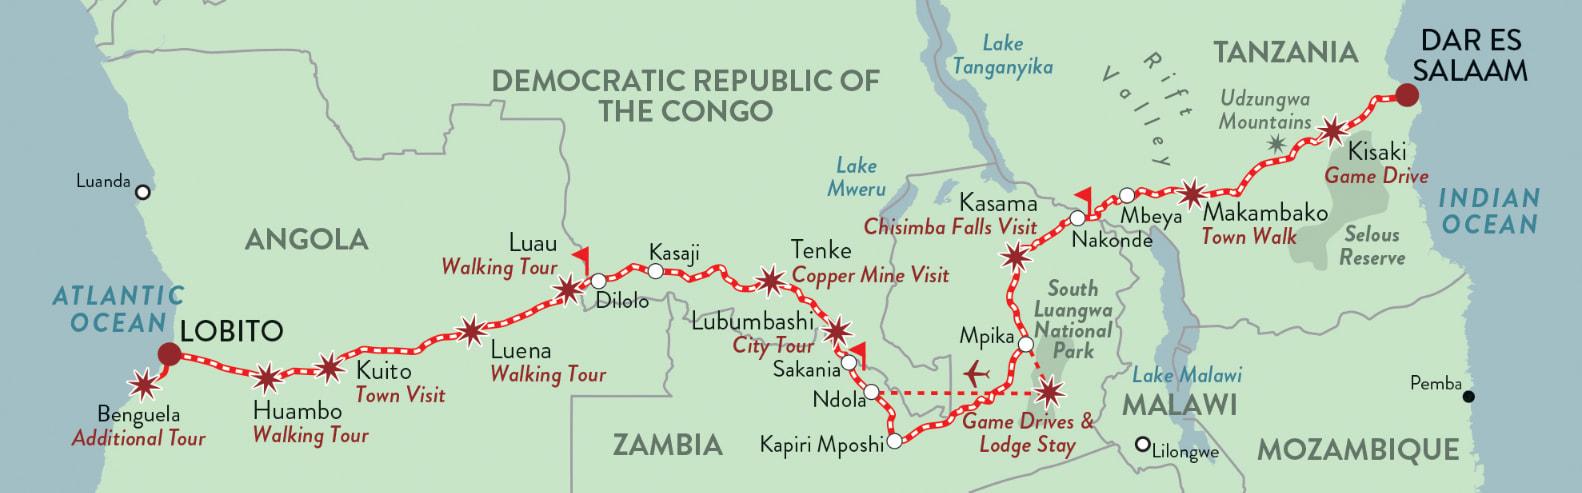 Lobito Corridor, potential trade gateway for Zambia and DRC, to be revitalised 🇿🇲 🇨🇩